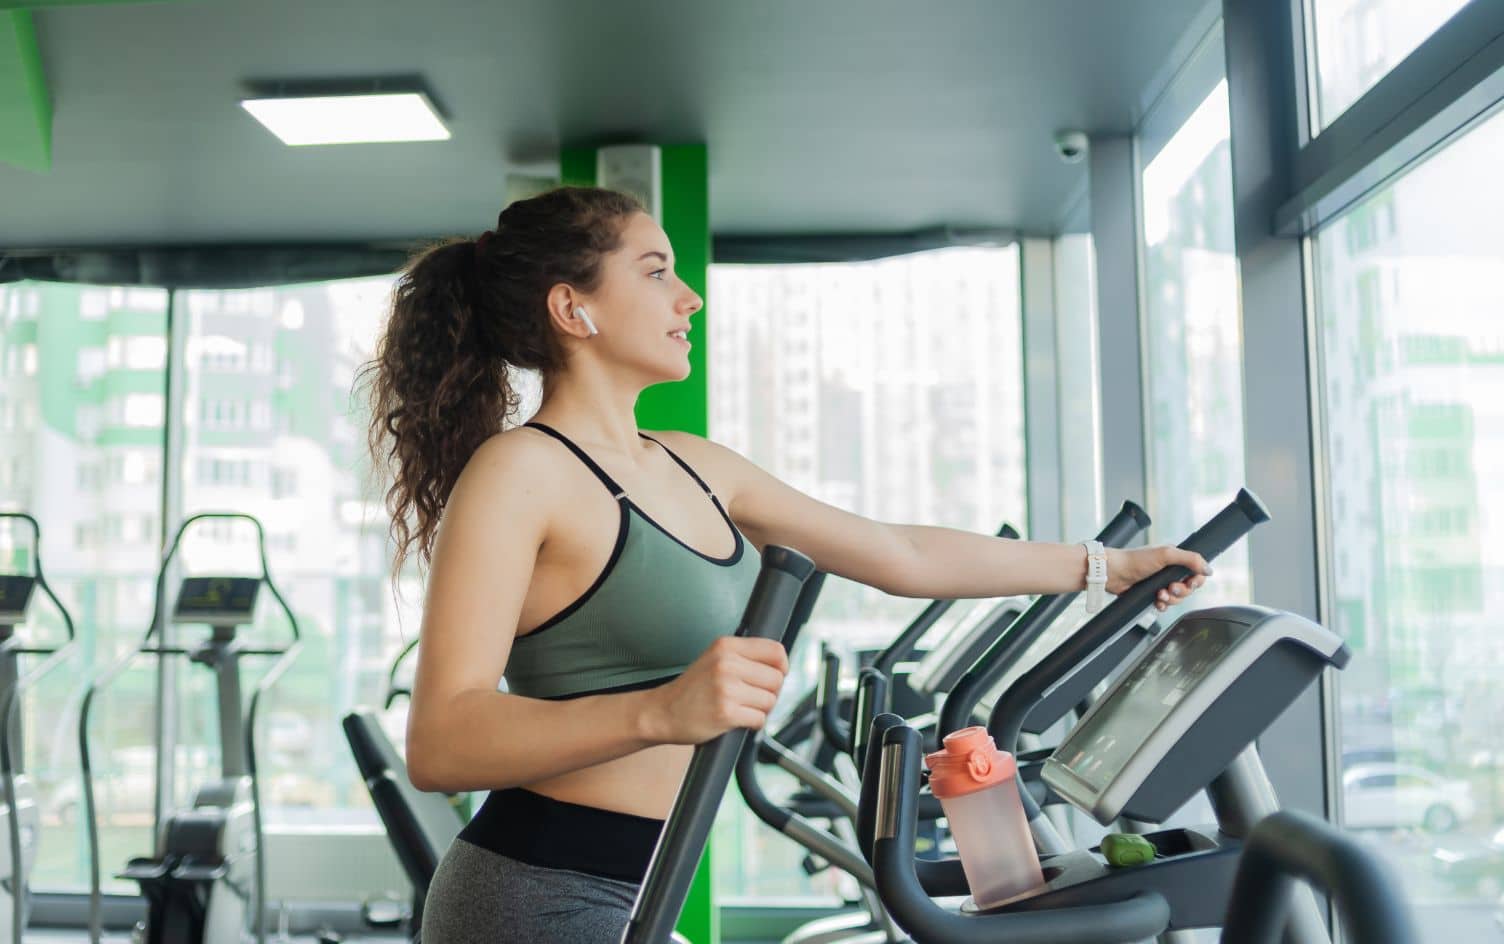 https://blog.myfitnesspal.com/wp-content/uploads/2019/04/Cardio-1-The-Link-Between-Breast-Size-and-Exercise-And-Why-the-Right-Sports-Bra-Matters.jpg